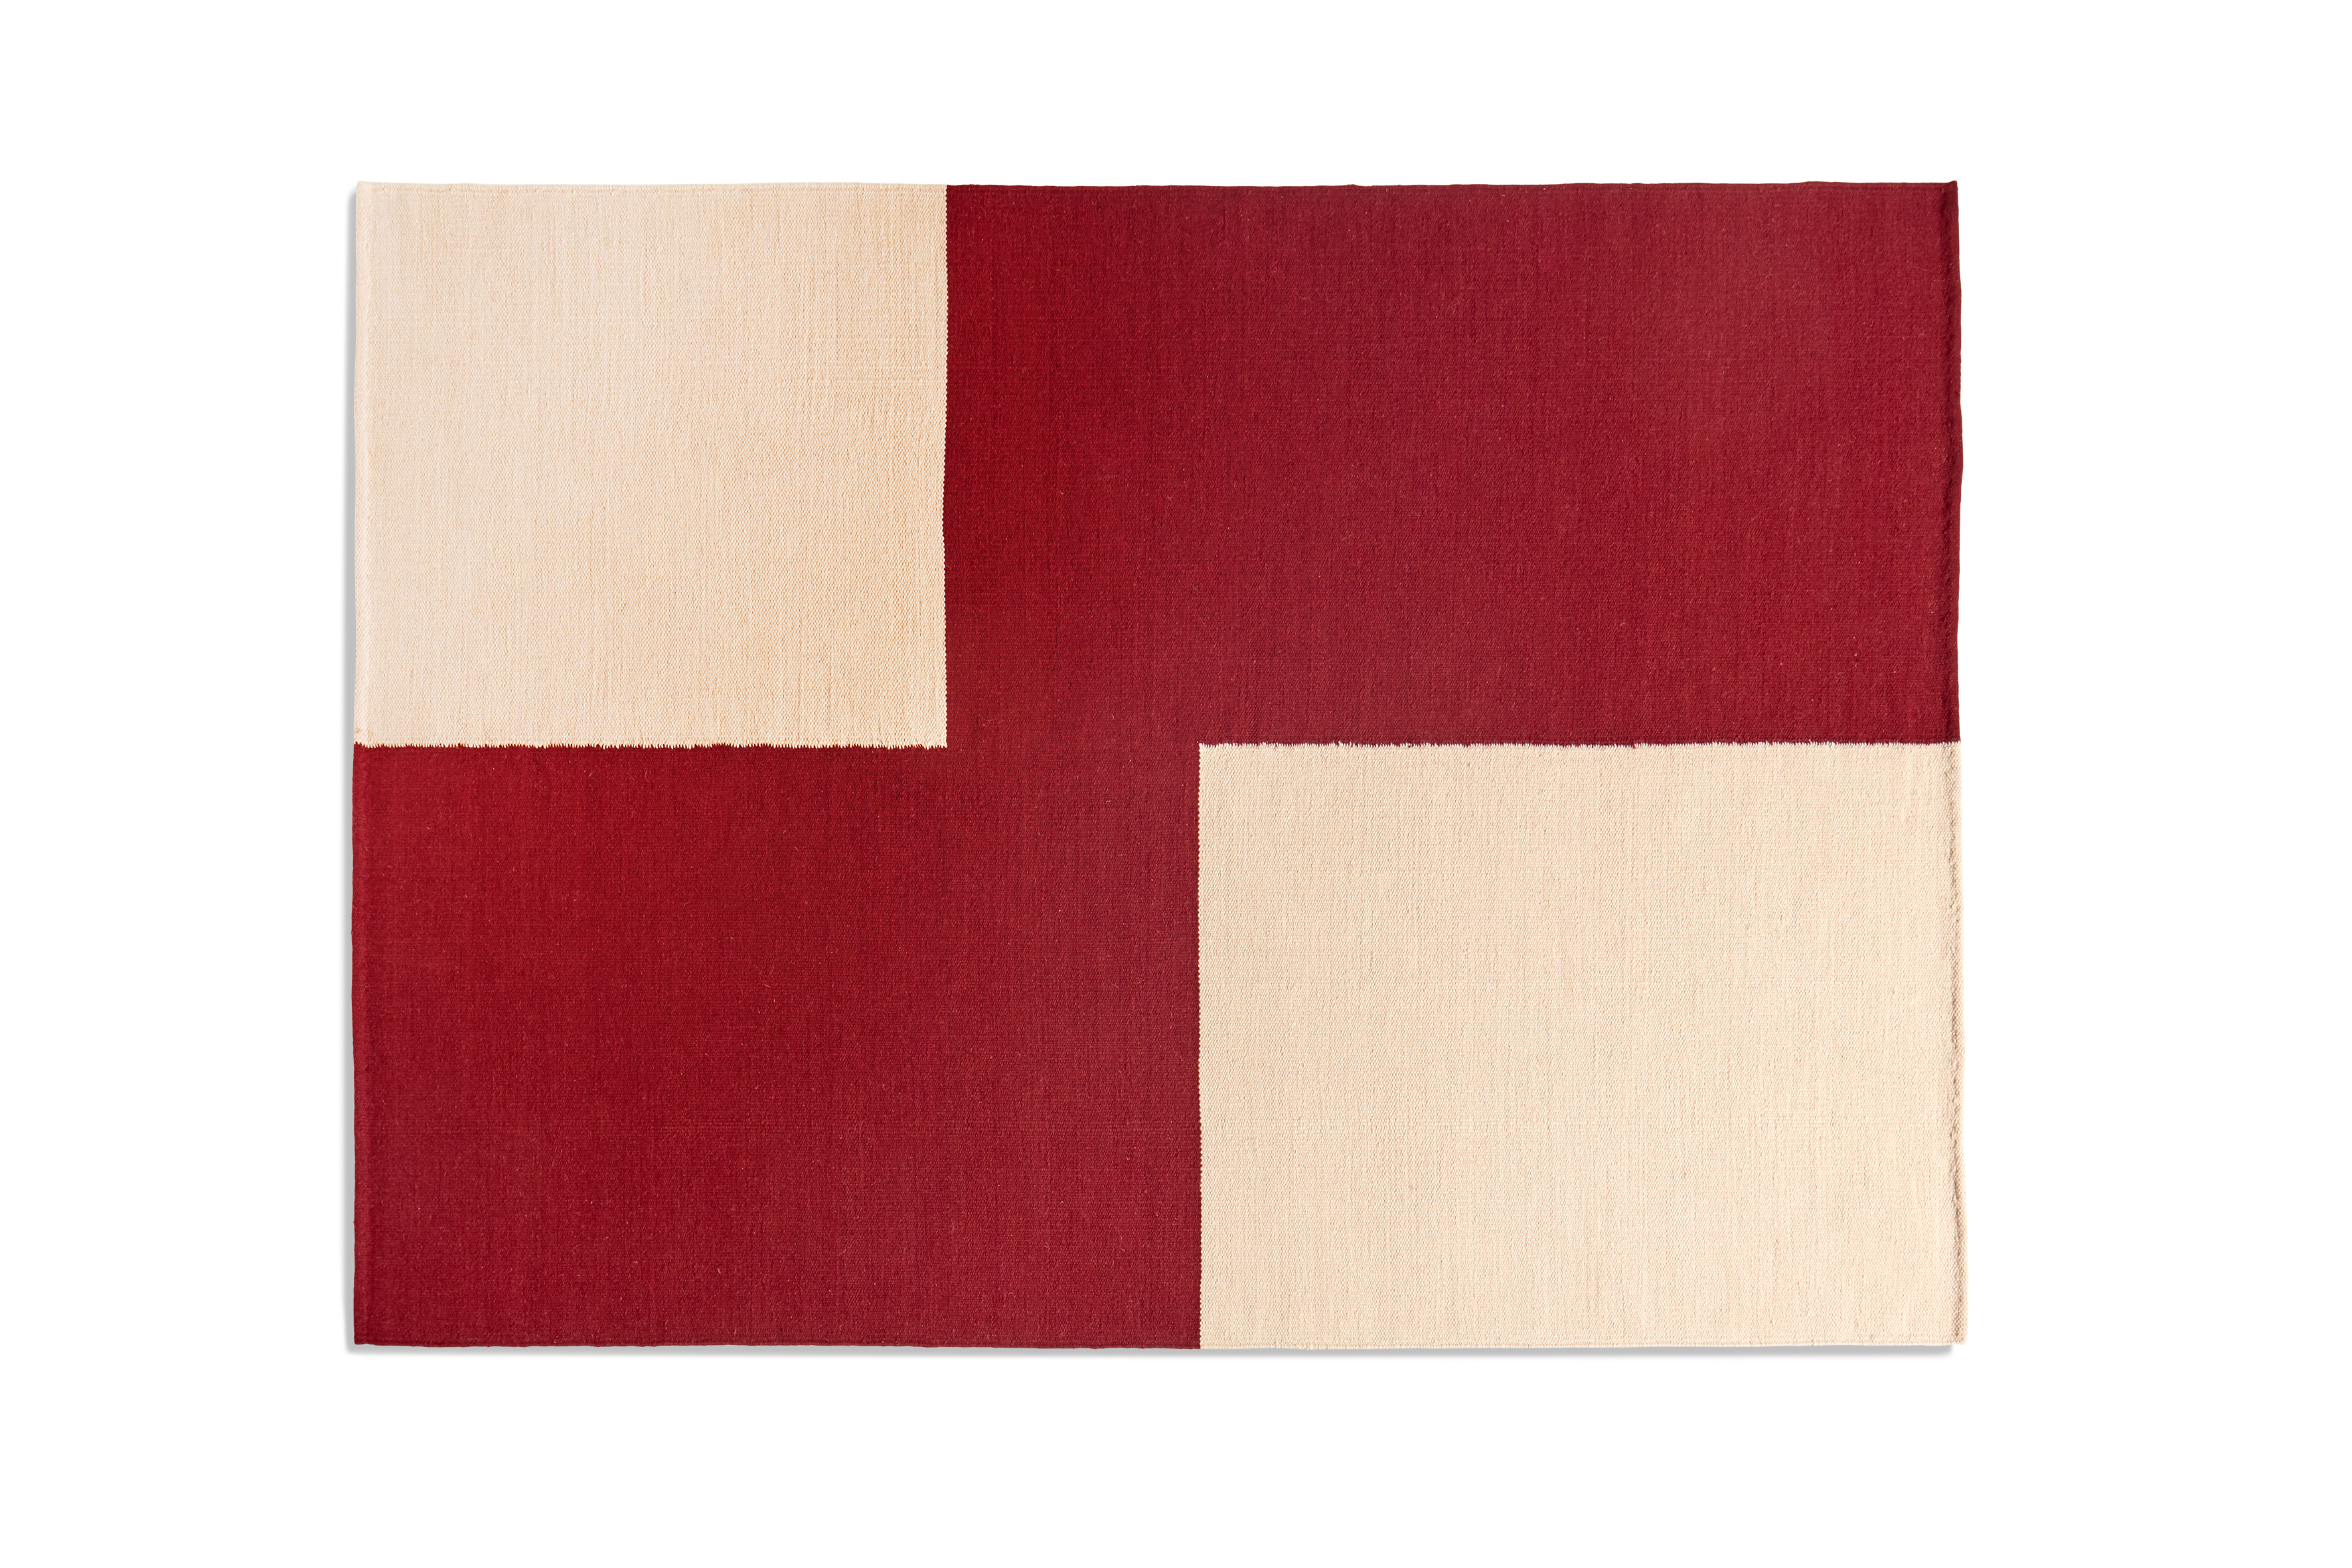 HAY - Ethan Cook Flat Works 170x240 - Red offset (541394)